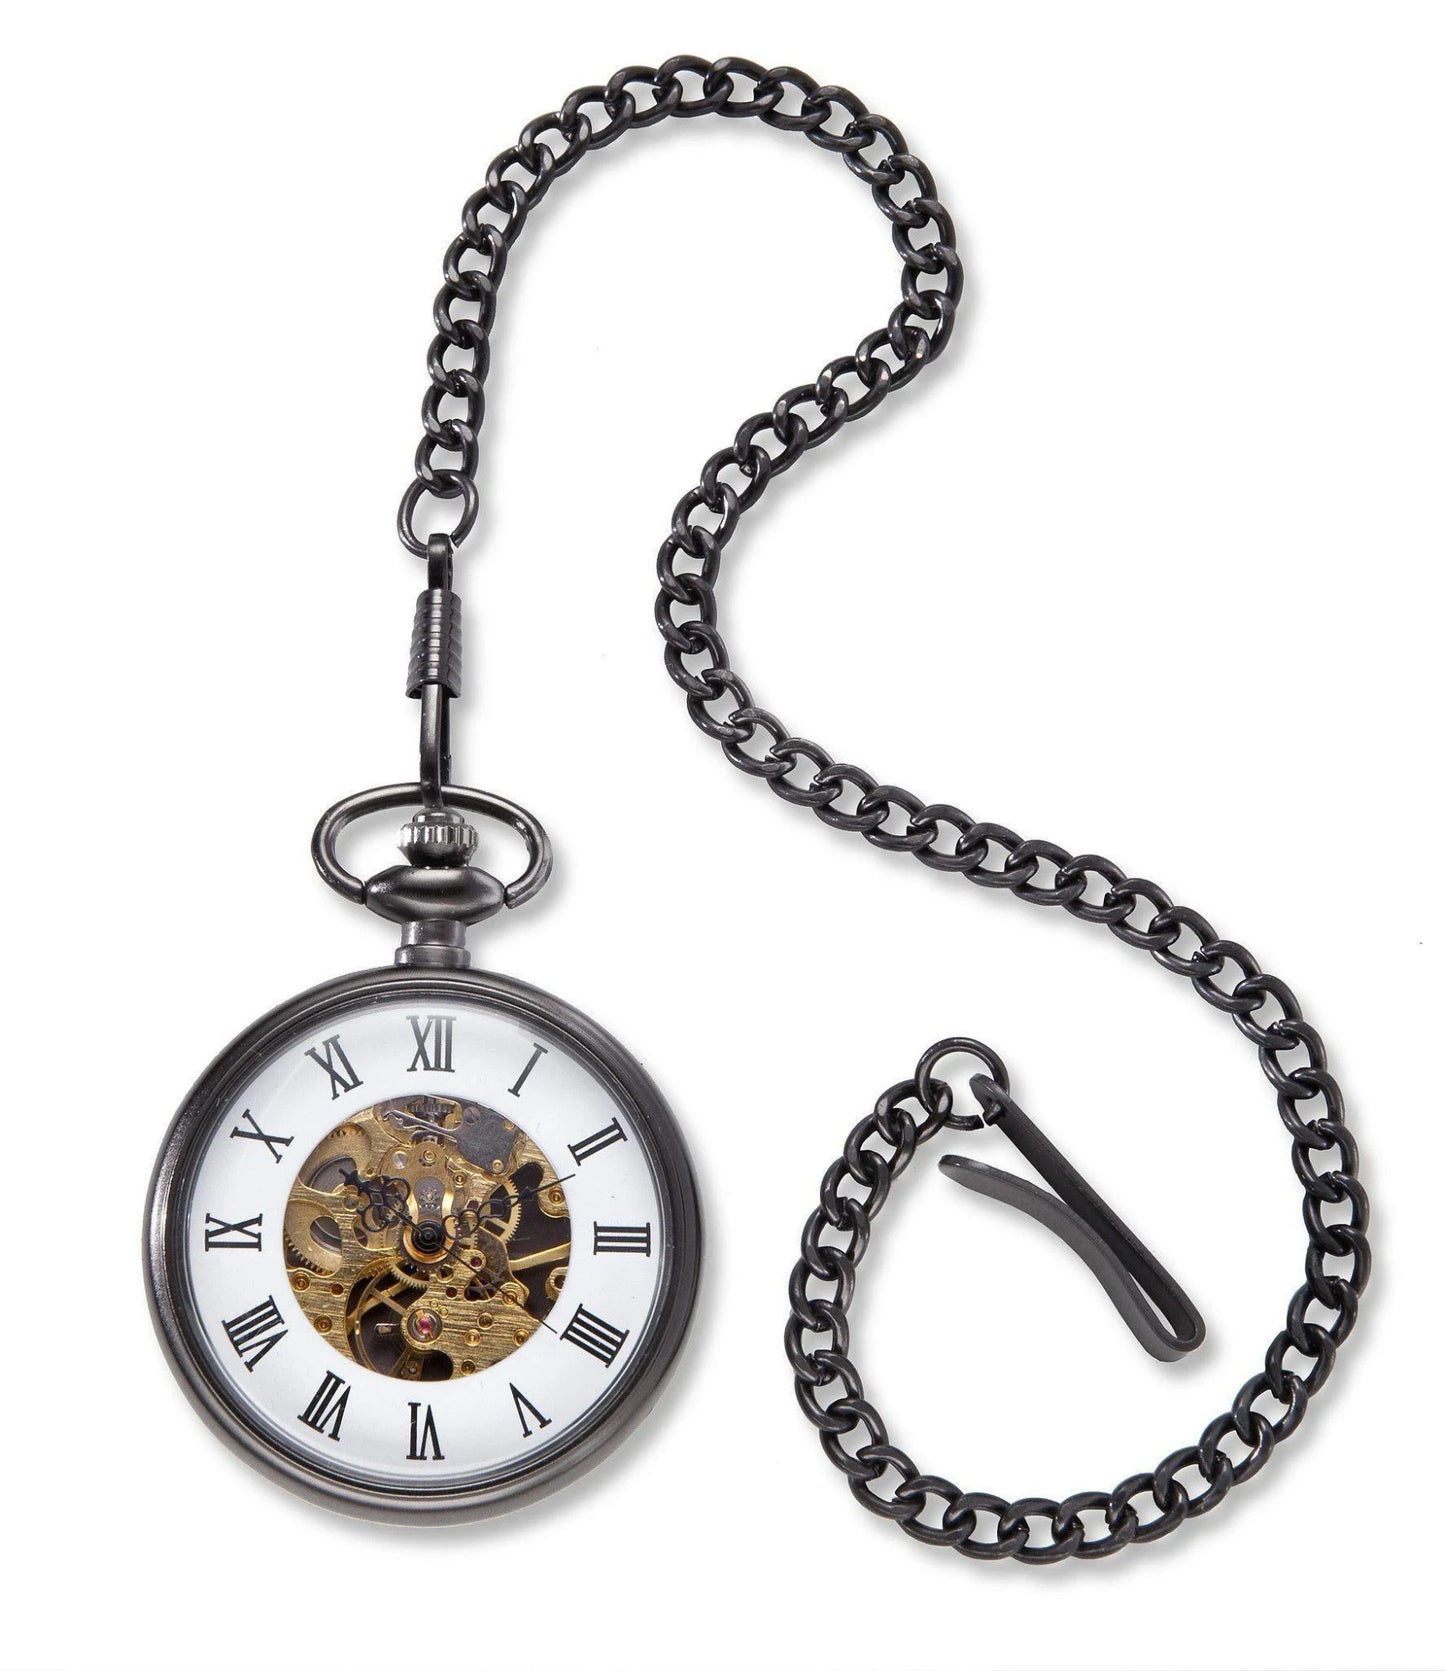 Personalized Open Face Pocket Watch - Block Initial with Name